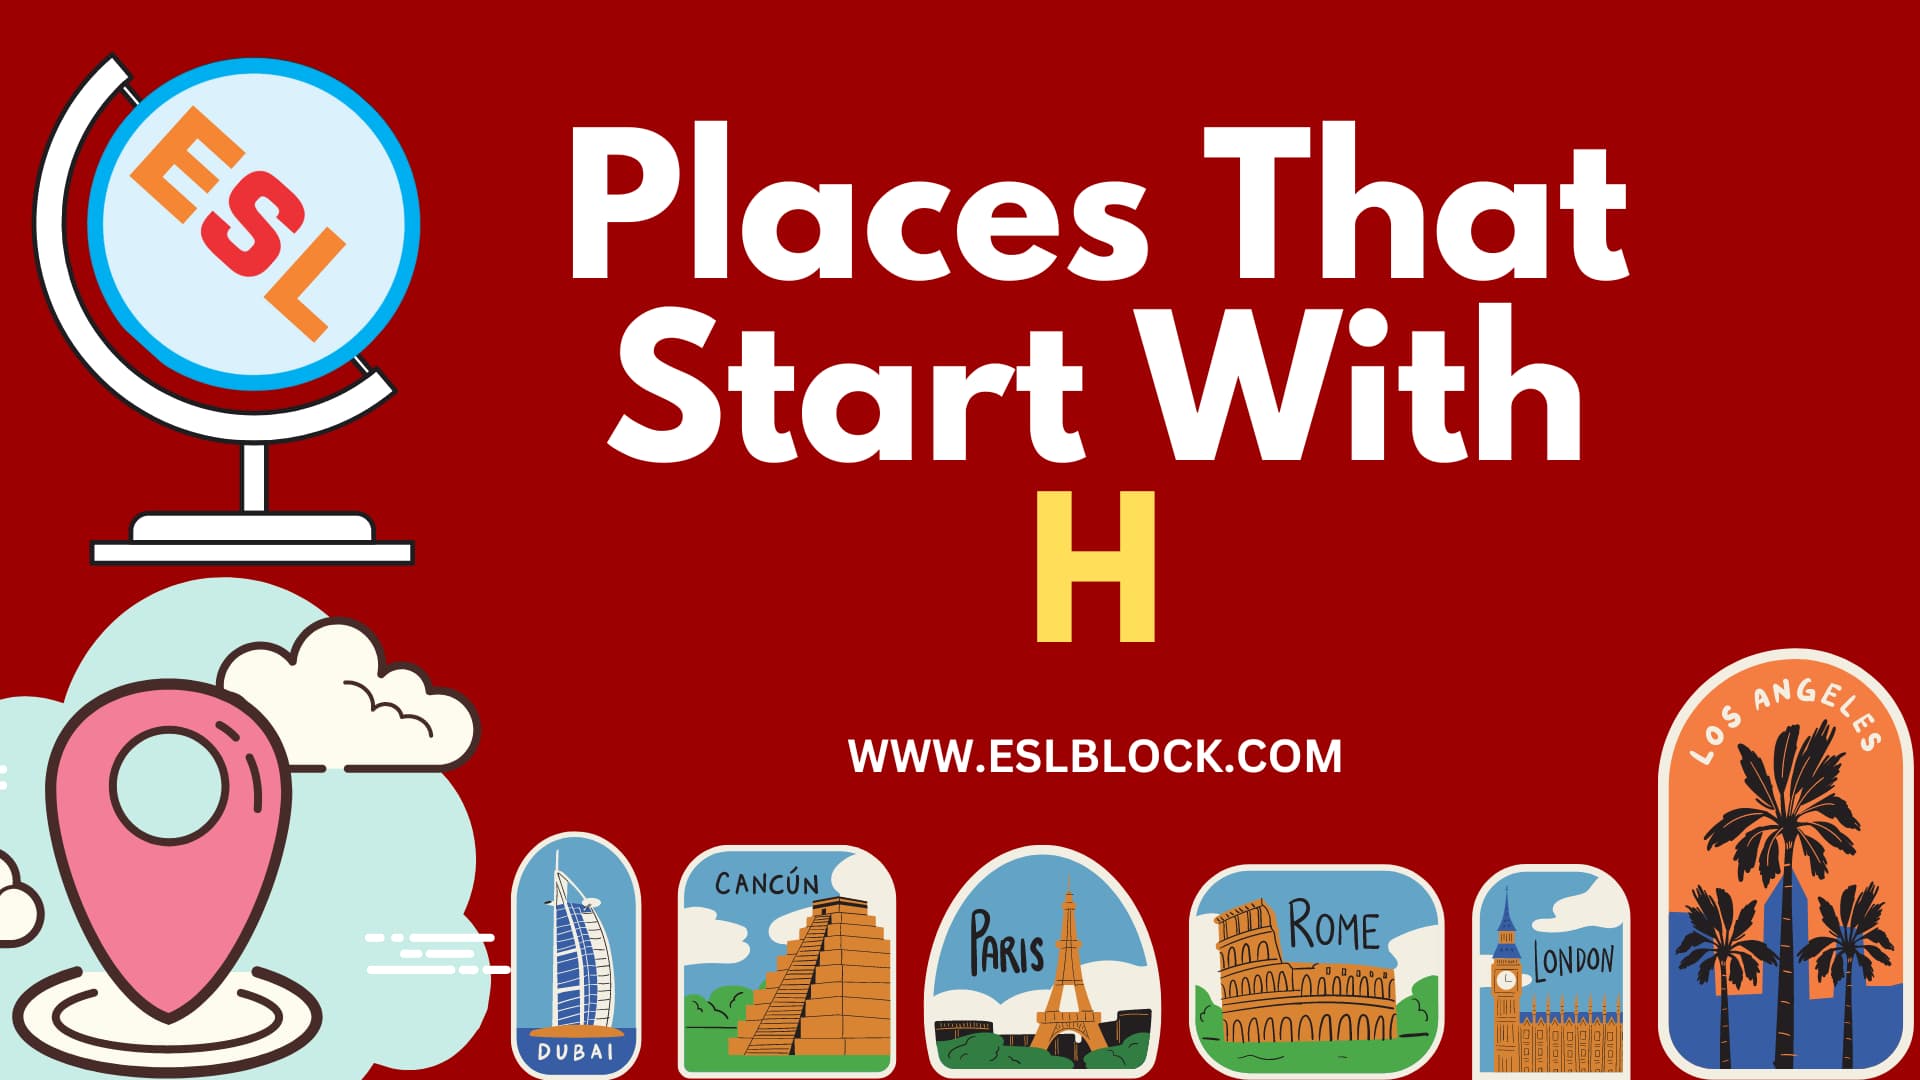 4 Letter Places, 5 Letter Places Starting With H, English, English Grammar, English Vocabulary, English Words, H Places, H Places in English, H Places Names, List of Places That Start With H, Places List, Places Names, Places That Start With H, Vocabulary, Words That Start With H